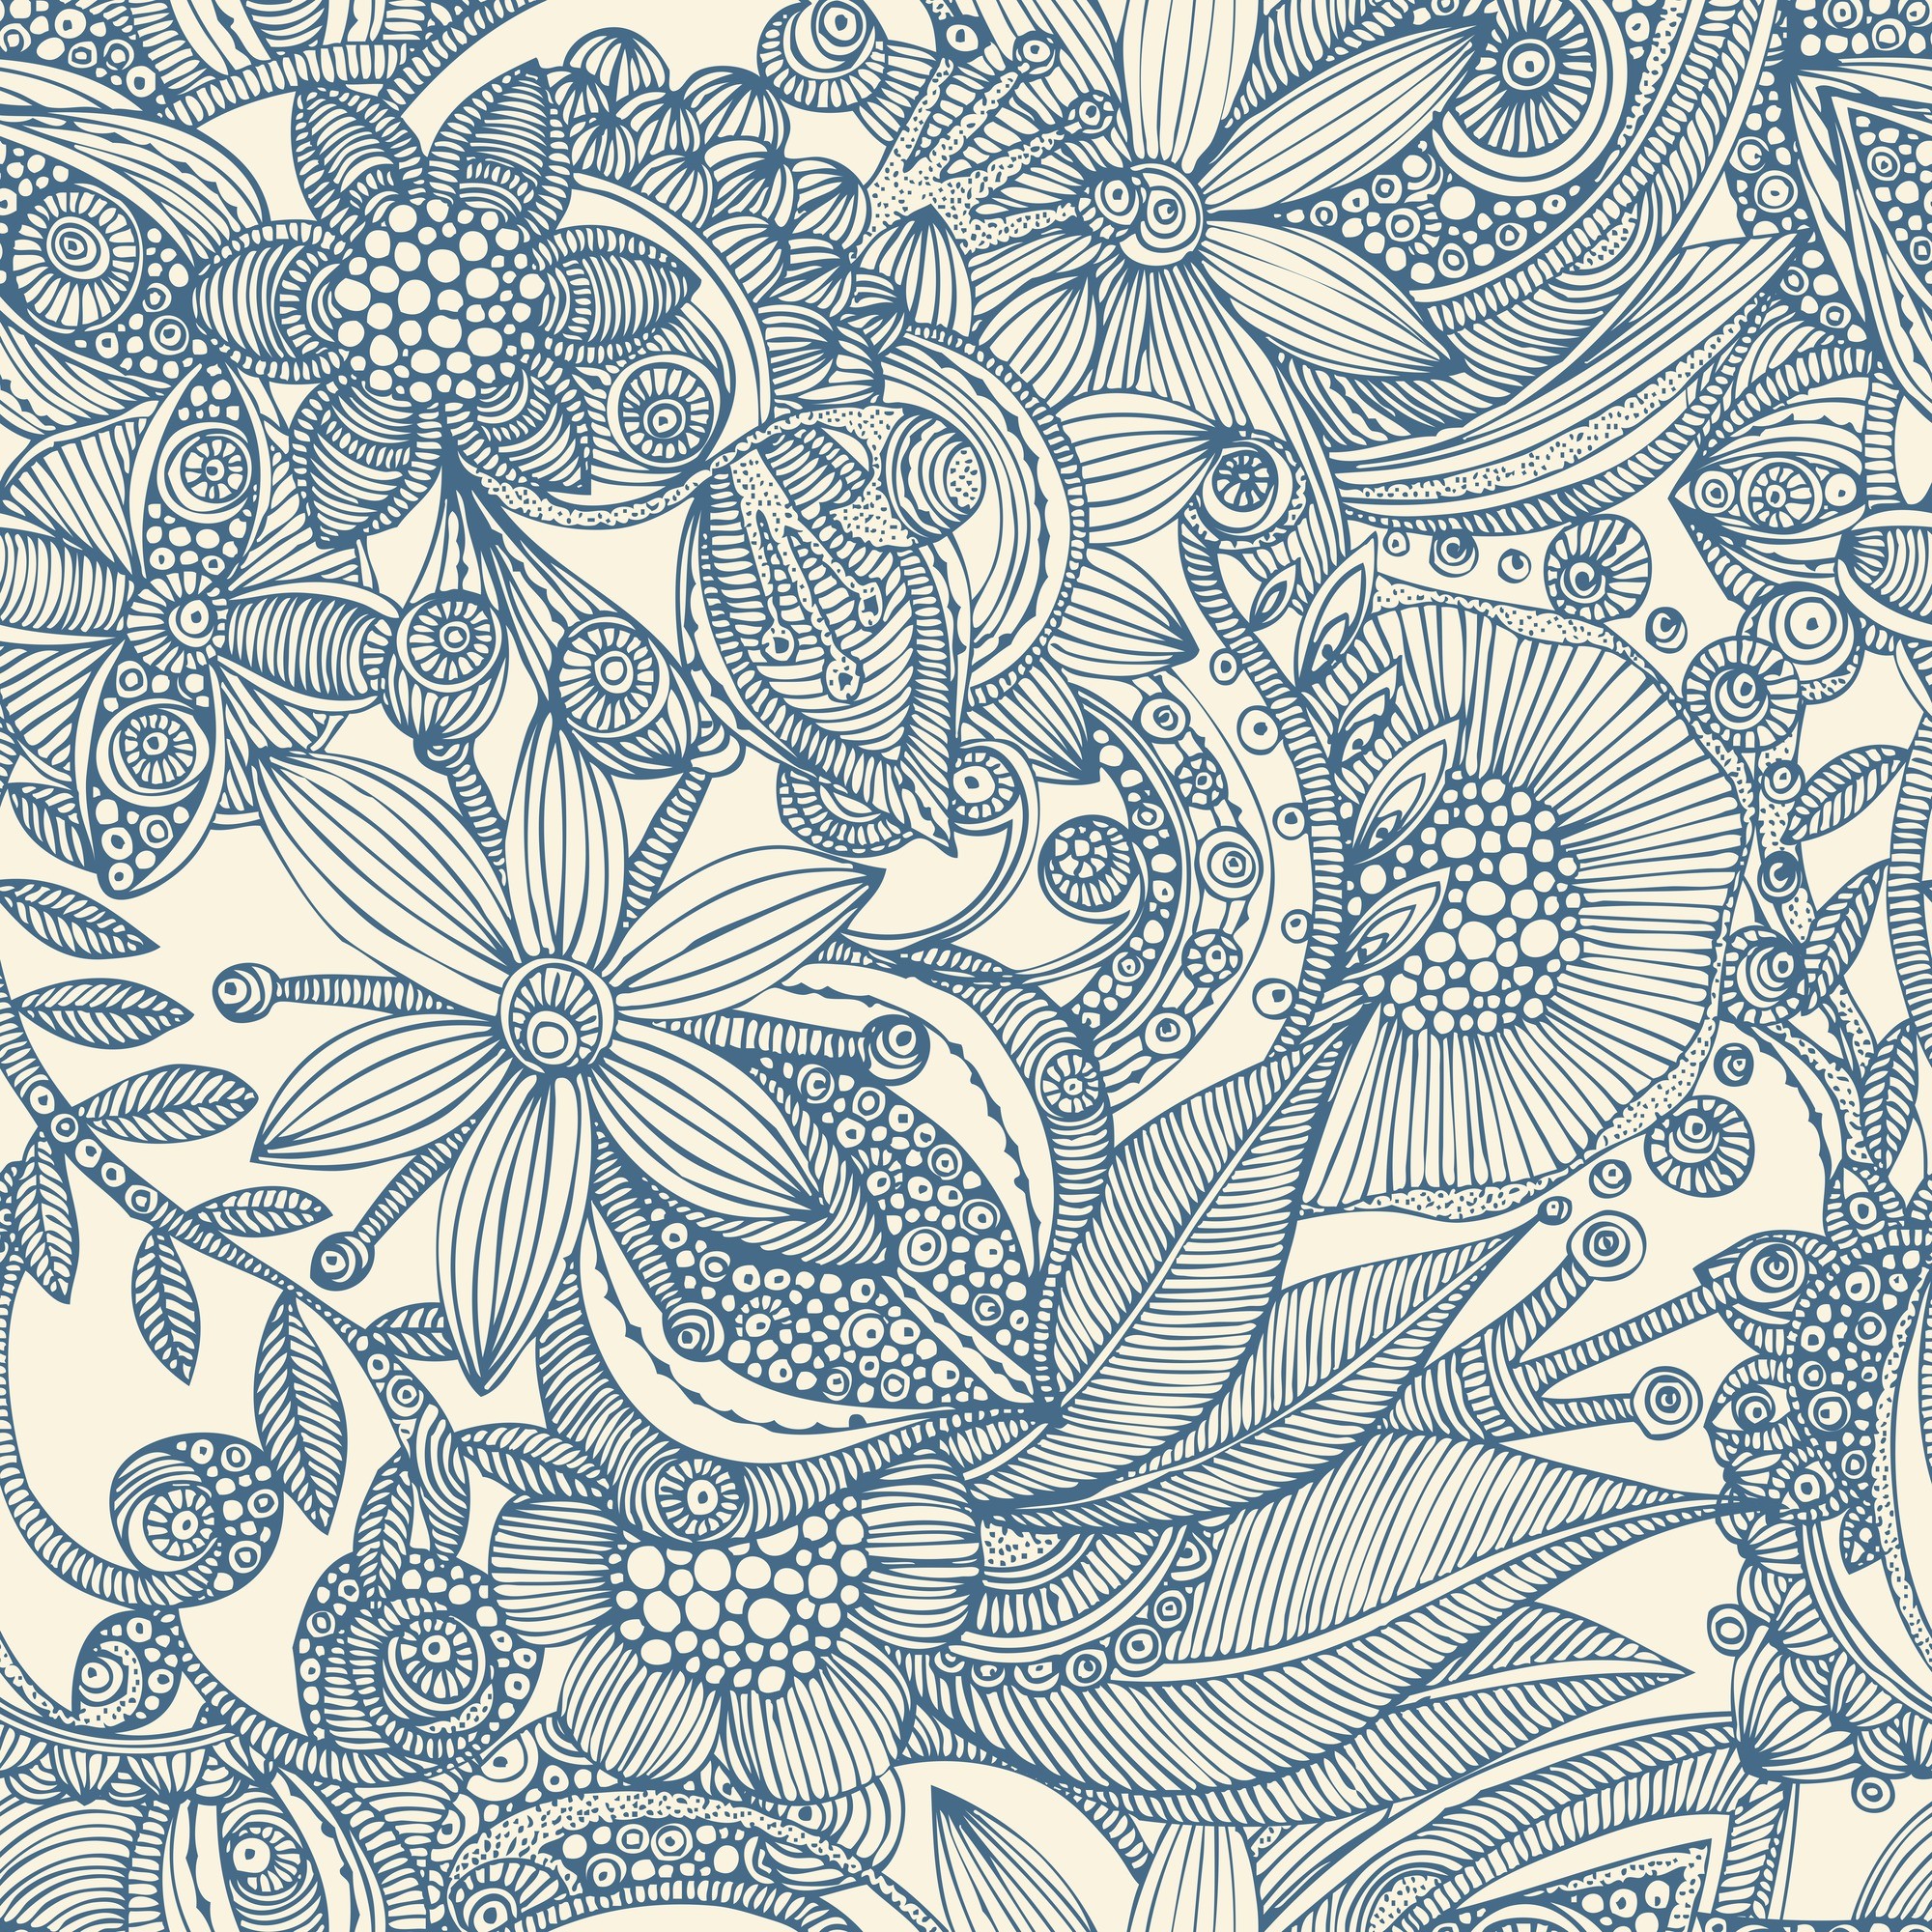 2000x2000 Flowers and doodles blue Wall Mural Photo Wallpaper